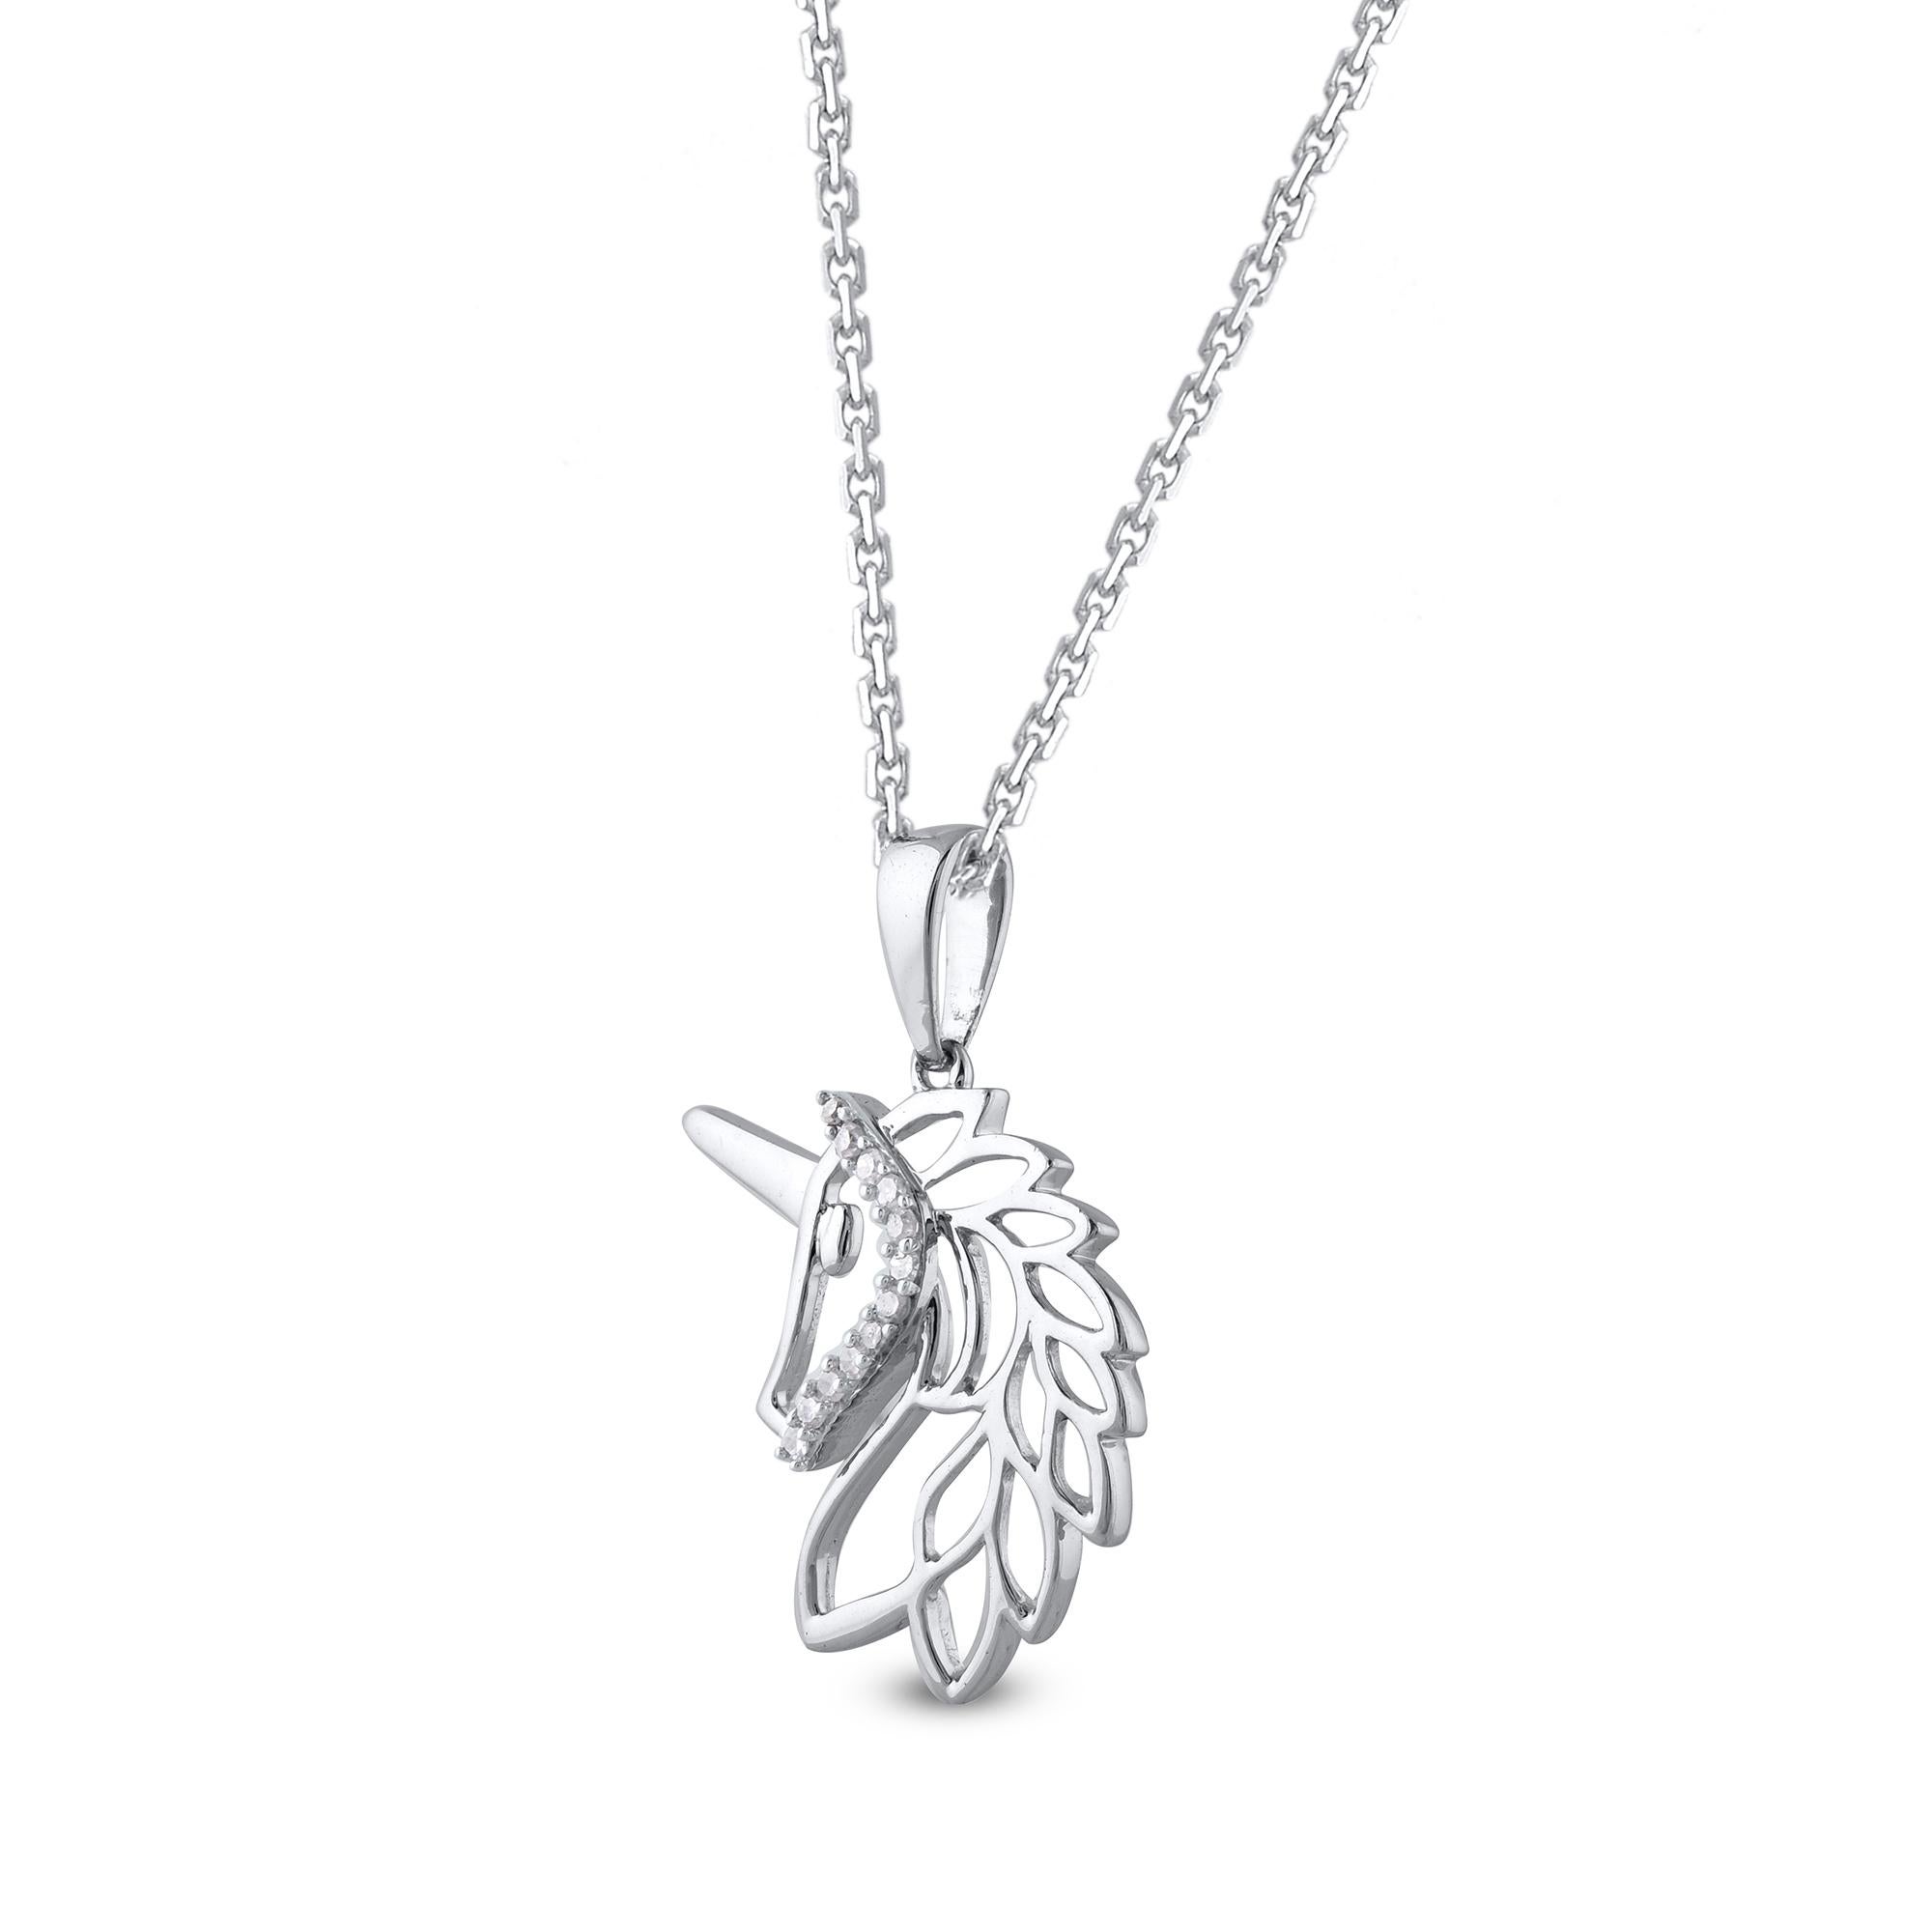 Bursting with charishma, this sparkling unicorn head pendant is delightful choice. Hand-crafted by our in-house experts in 14 karat white gold and studded with 12 round diamond set in prong setting. The total diamond weight is 0.05 carat and it